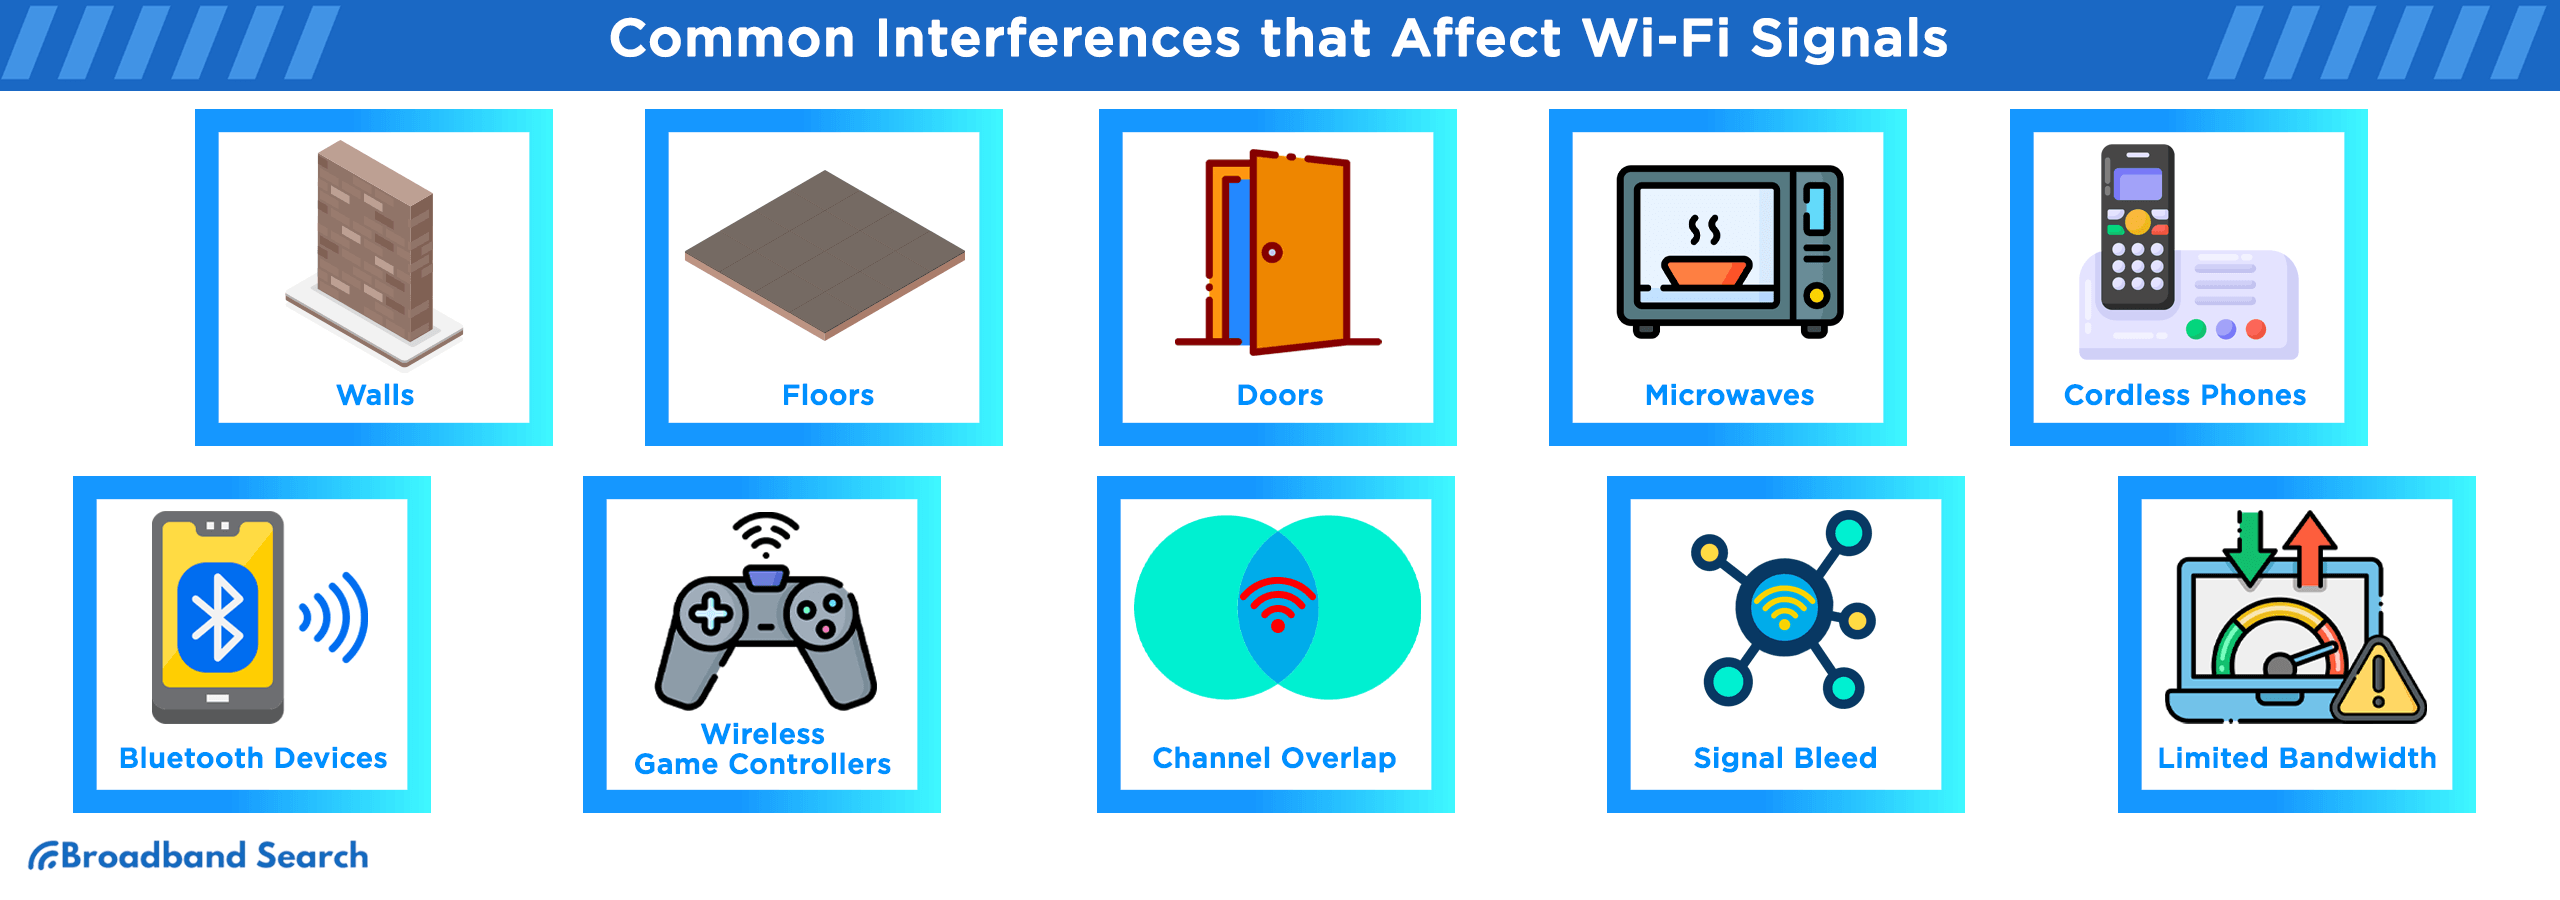 Common interferences that affect wi-fi signals